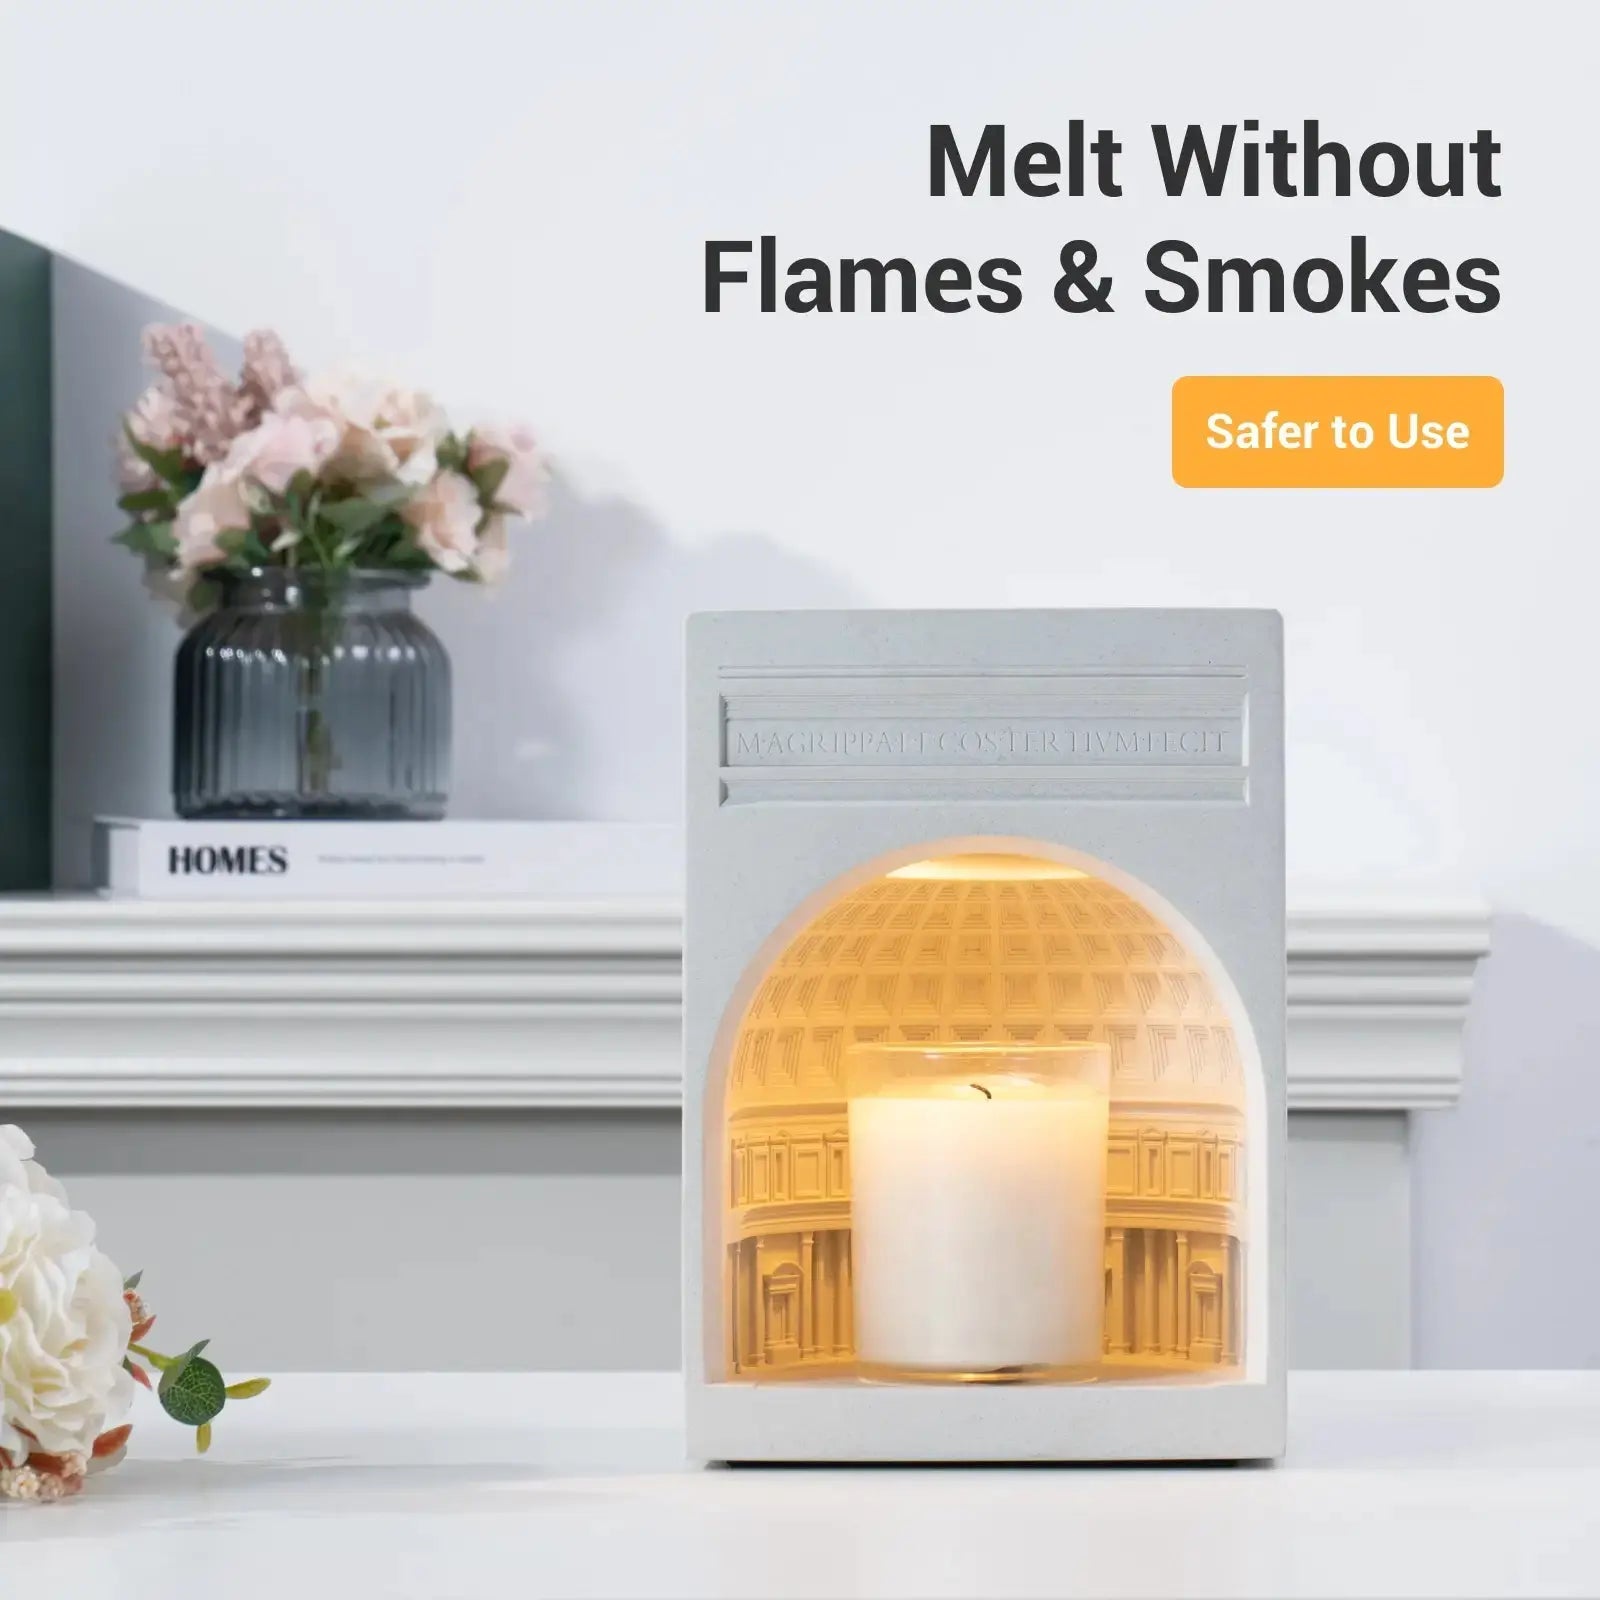 Exquisite Dome Candle Warmer Lamp Cool Gadget